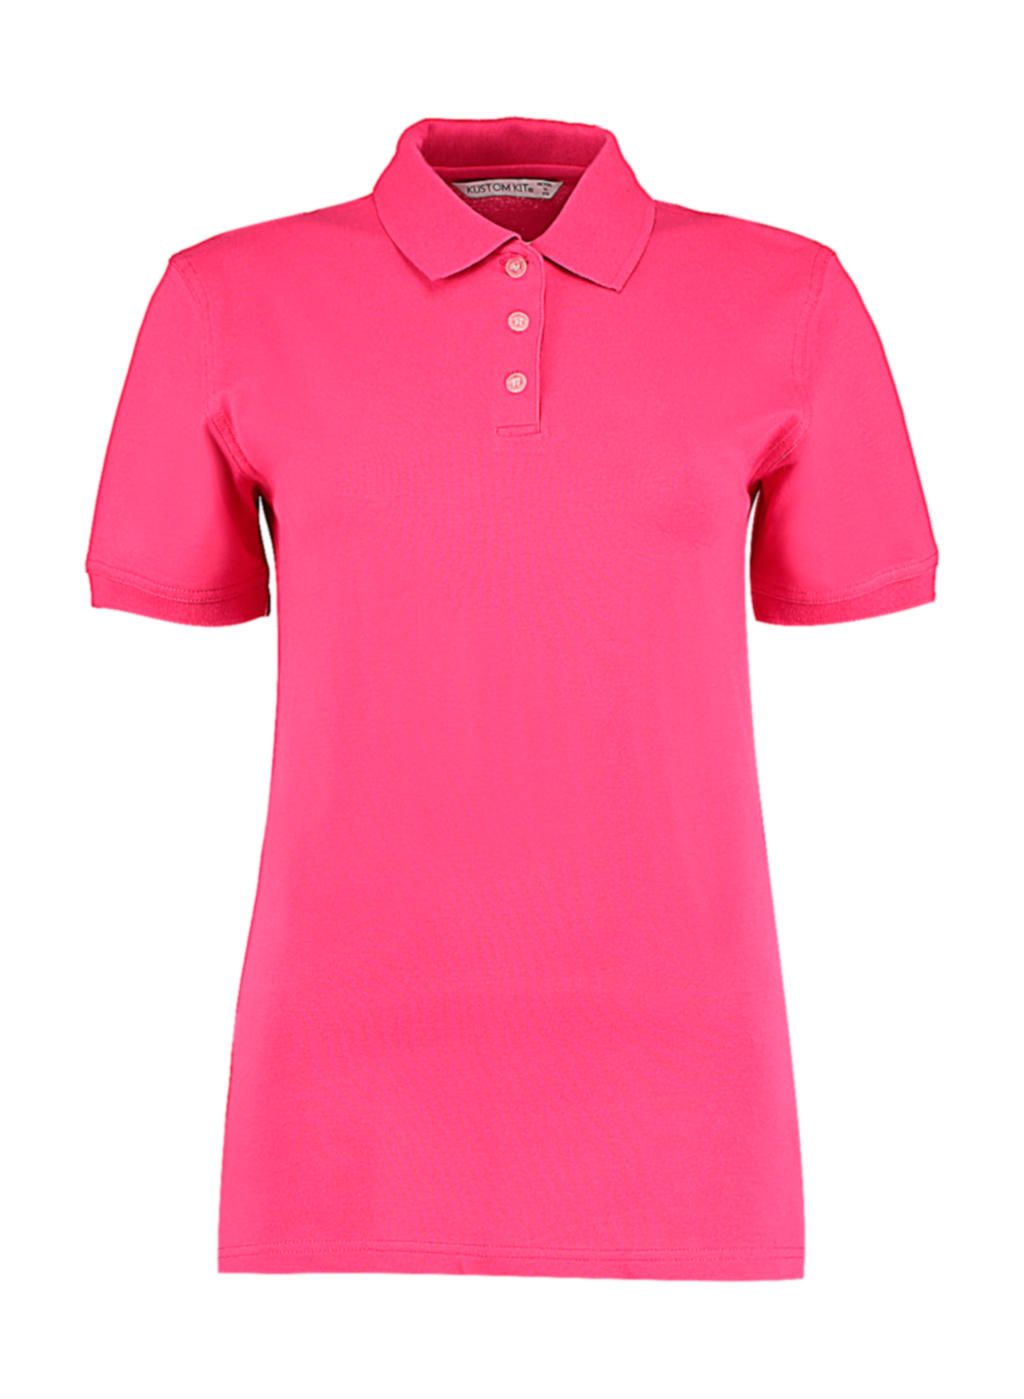  Womens Regular Fit Kate Comfortec? Polo in Farbe Raspberry